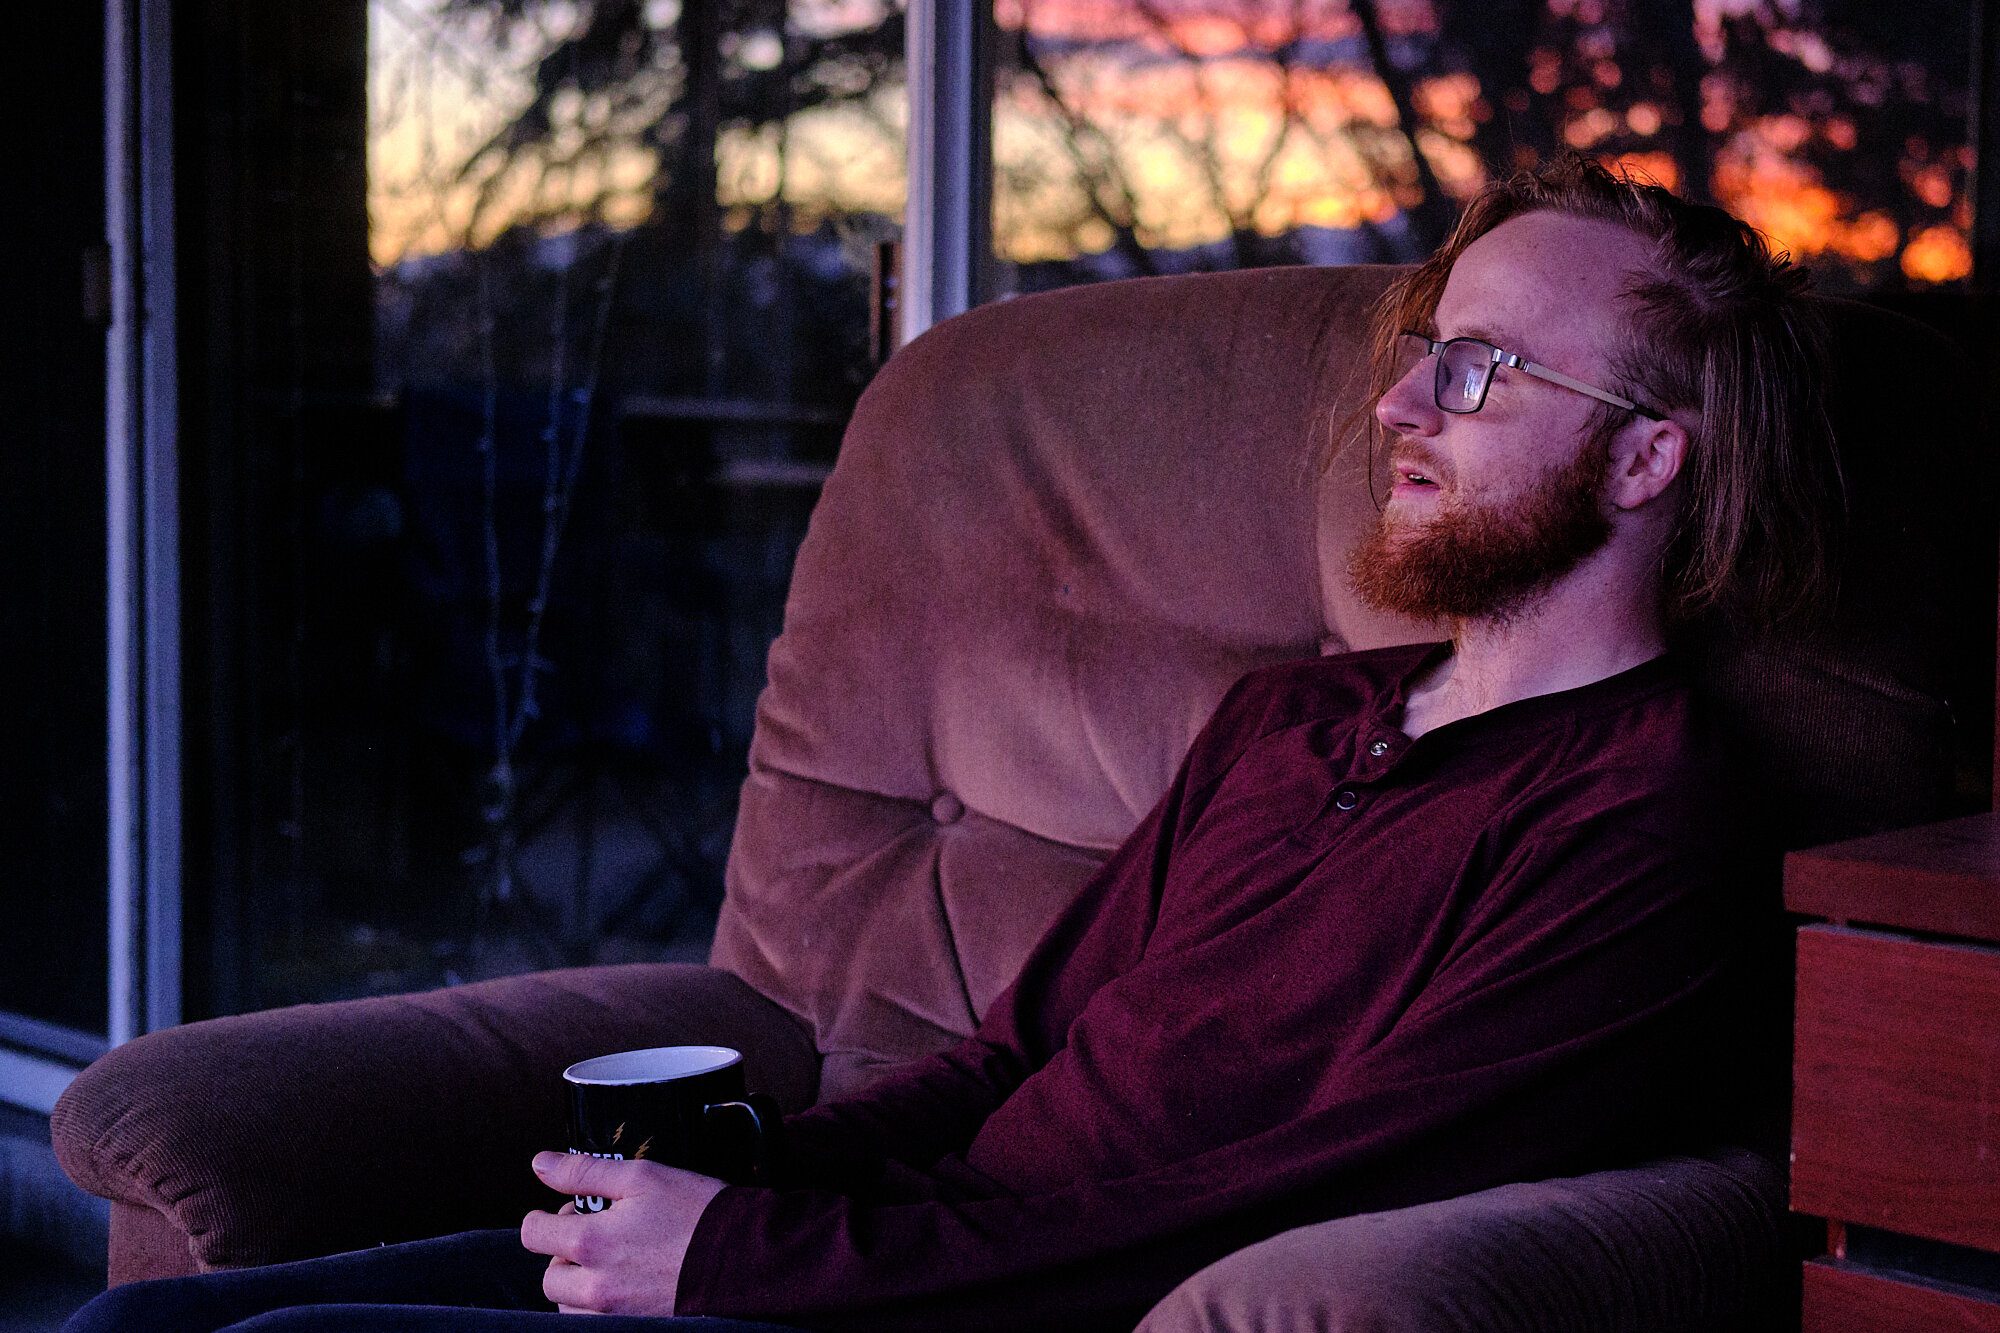  Lebowski enjoys sunset from our back porch on an unusually warm day. | Holladay, UT 2/24/20 